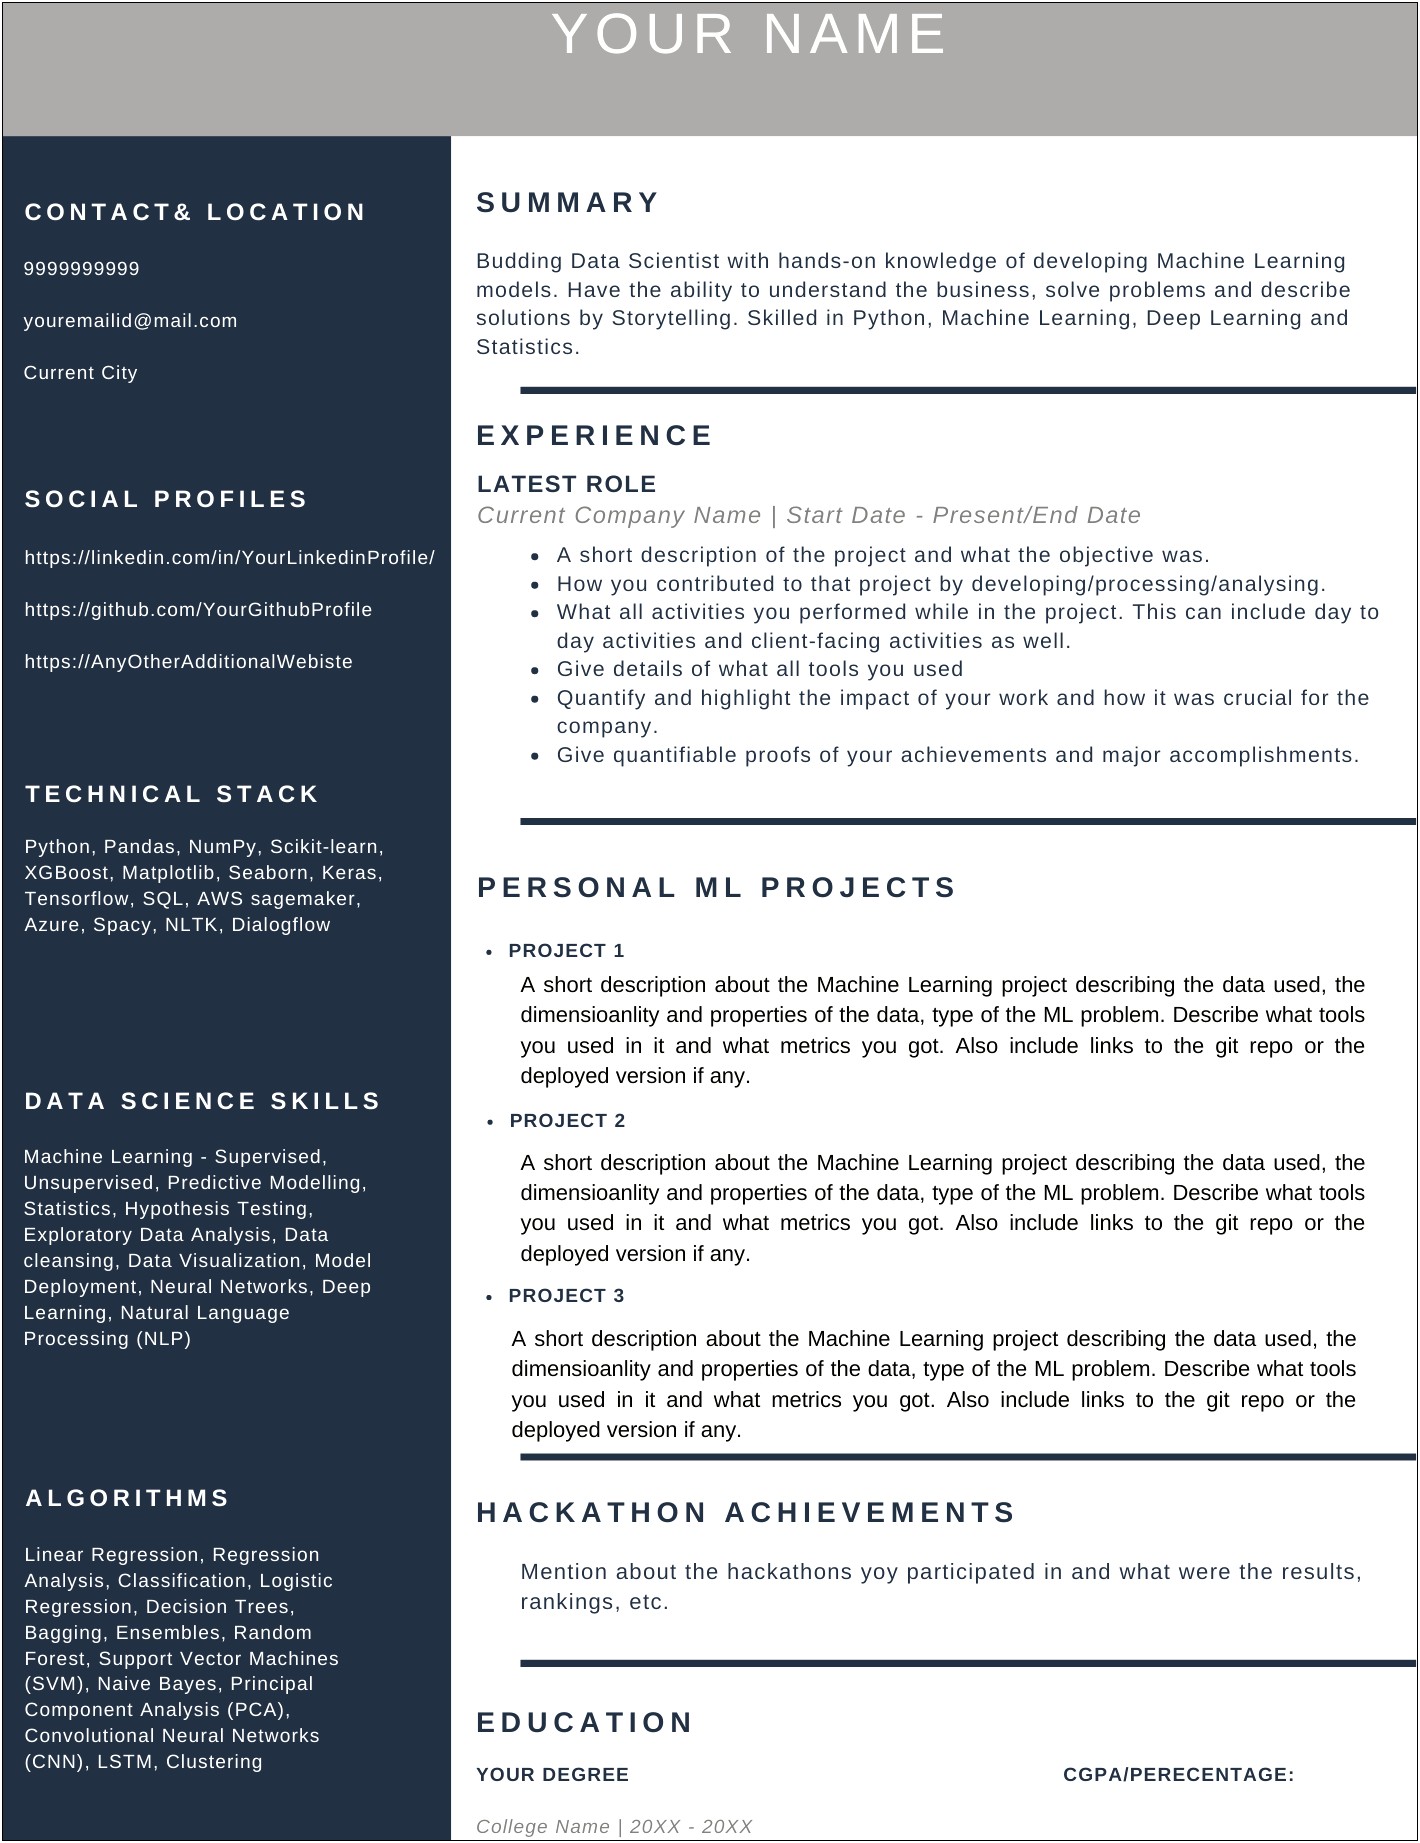 Where To Put Machine Learning In Resume